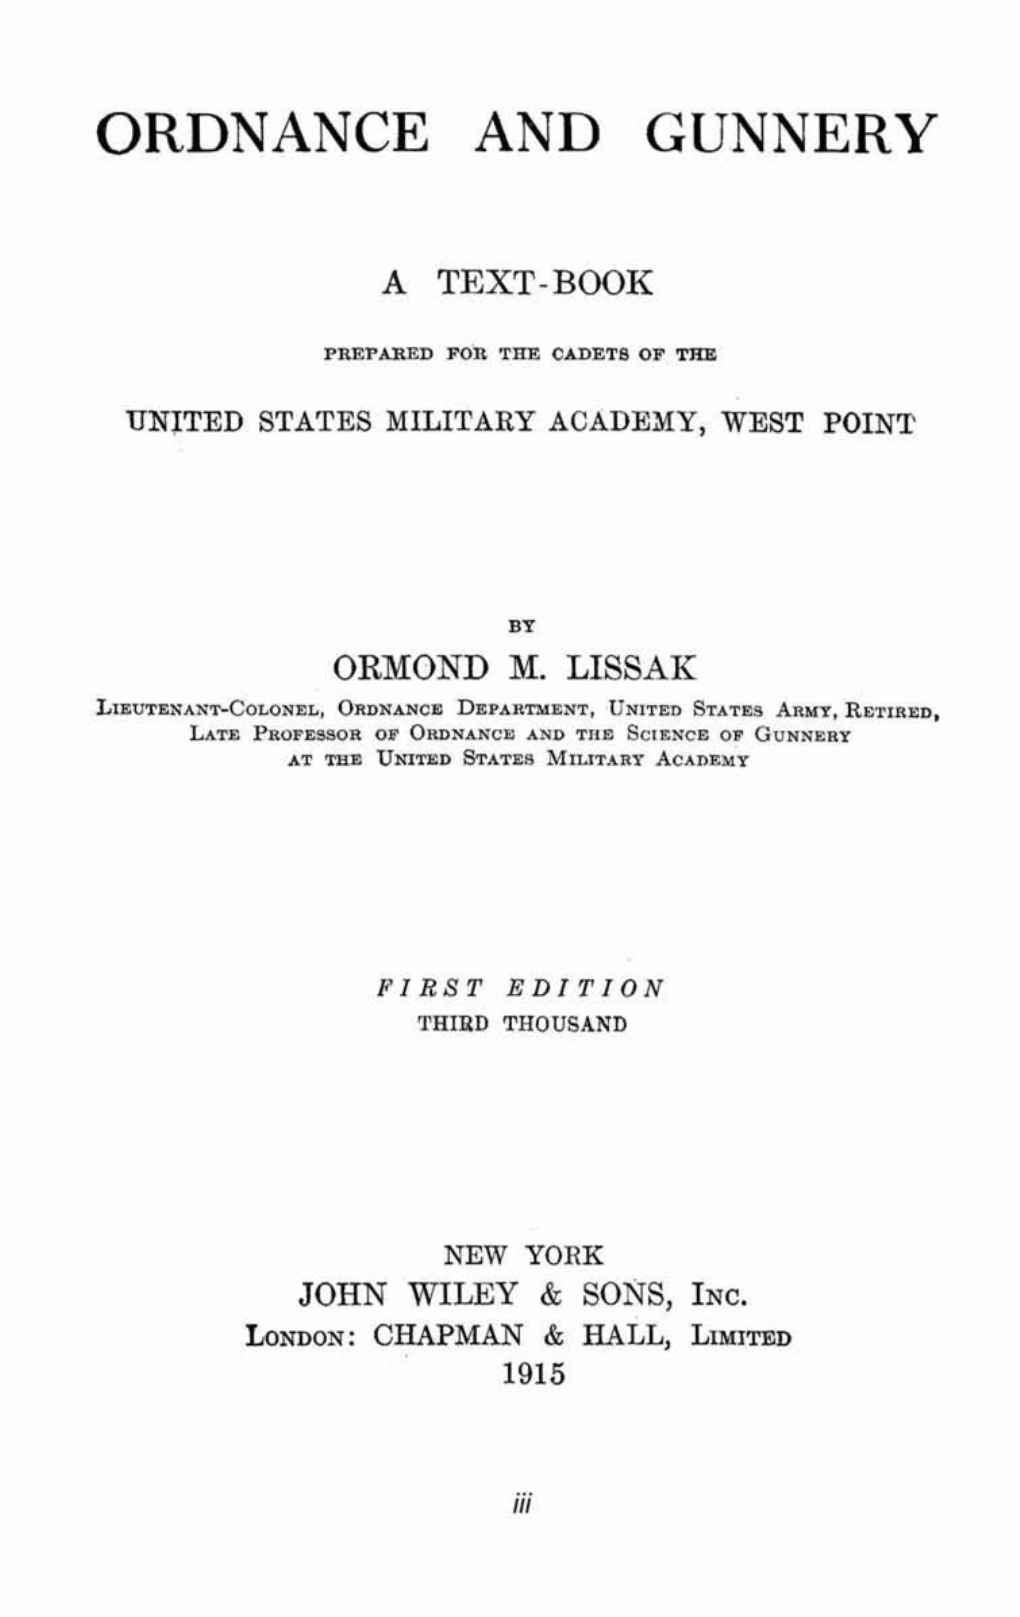 Ordnance and Gunnery, a Text Book